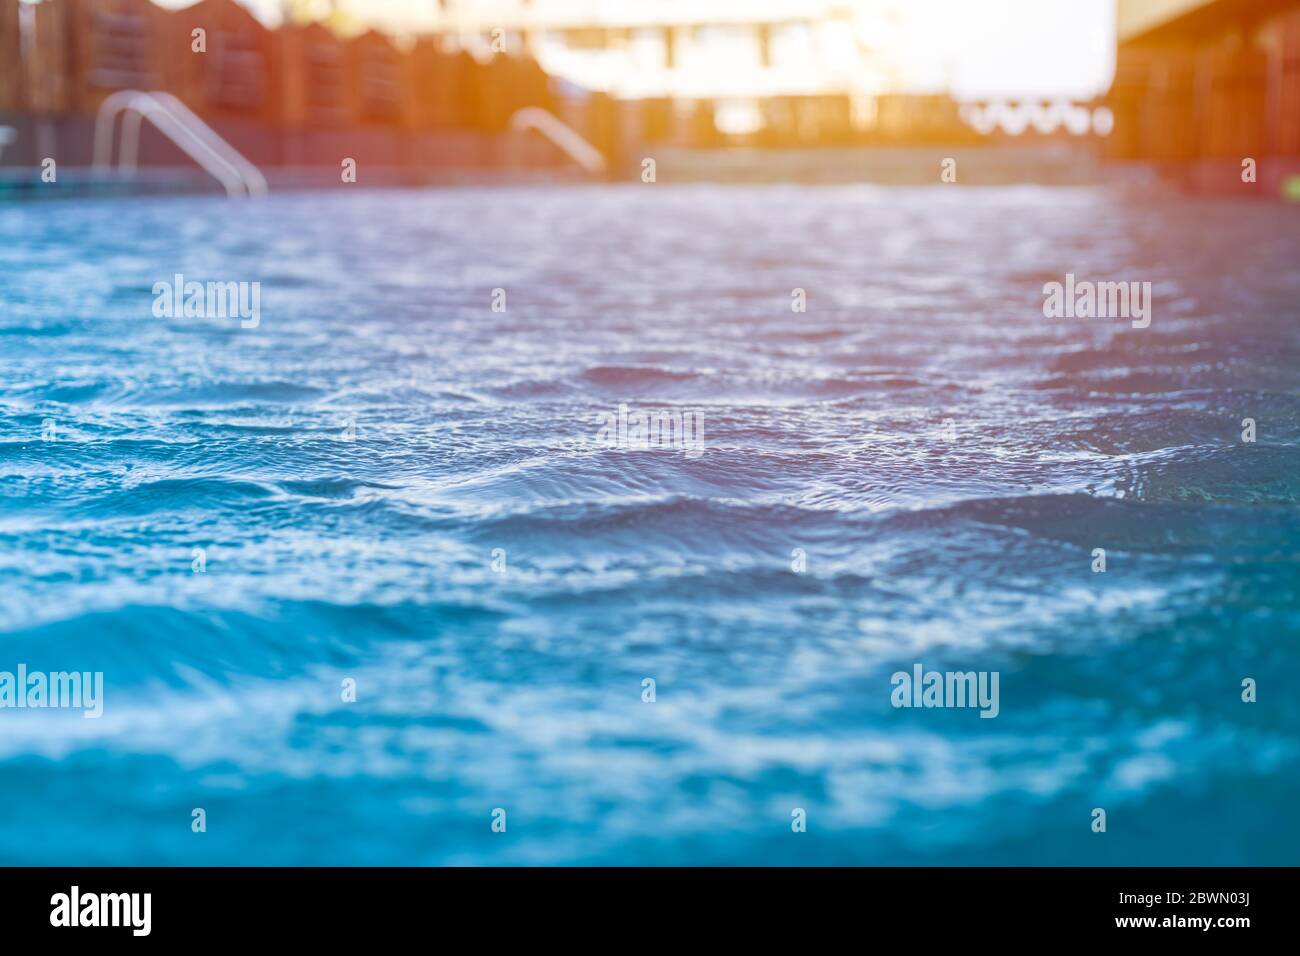 https://c8.alamy.com/comp/2BWN03J/blue-lagoon-cool-water-swimming-pool-wave-ripple-closeup-with-sunny-light-cooling-feel-in-summer-day-2BWN03J.jpg